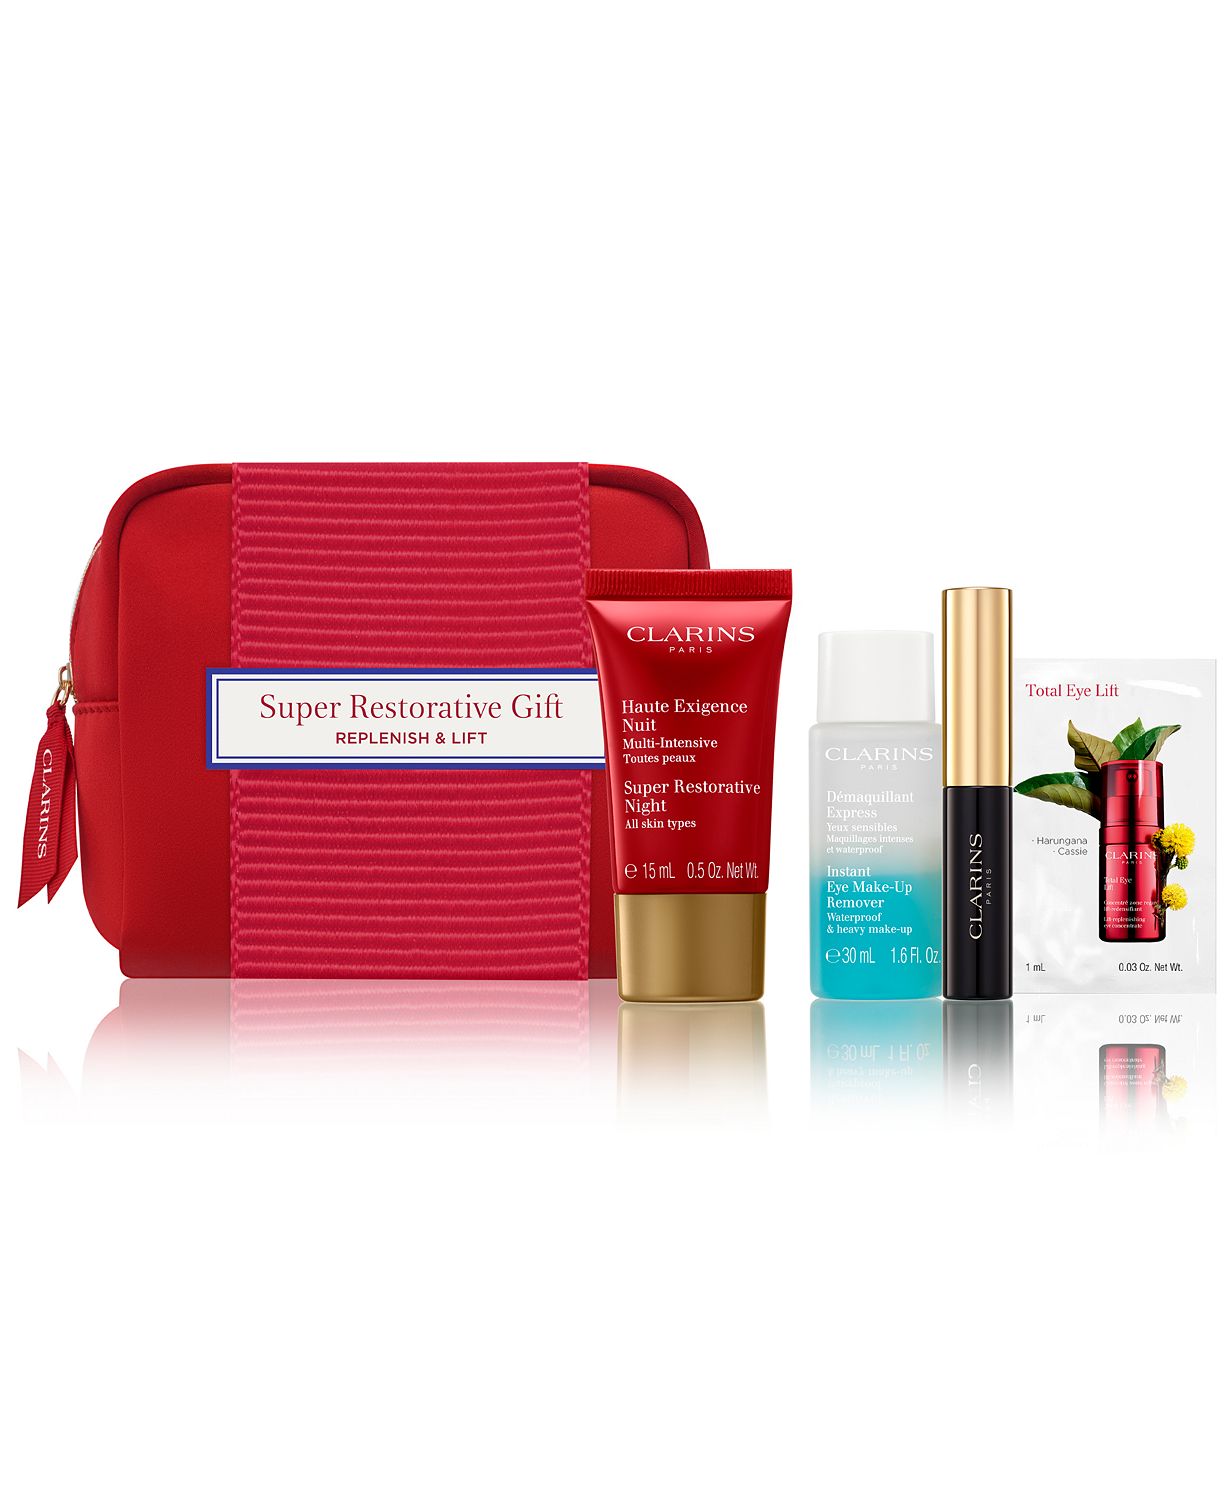 Choose your FREE 5-piece Gift with any $75 Clarins Purchase (Up to a $67 value!)